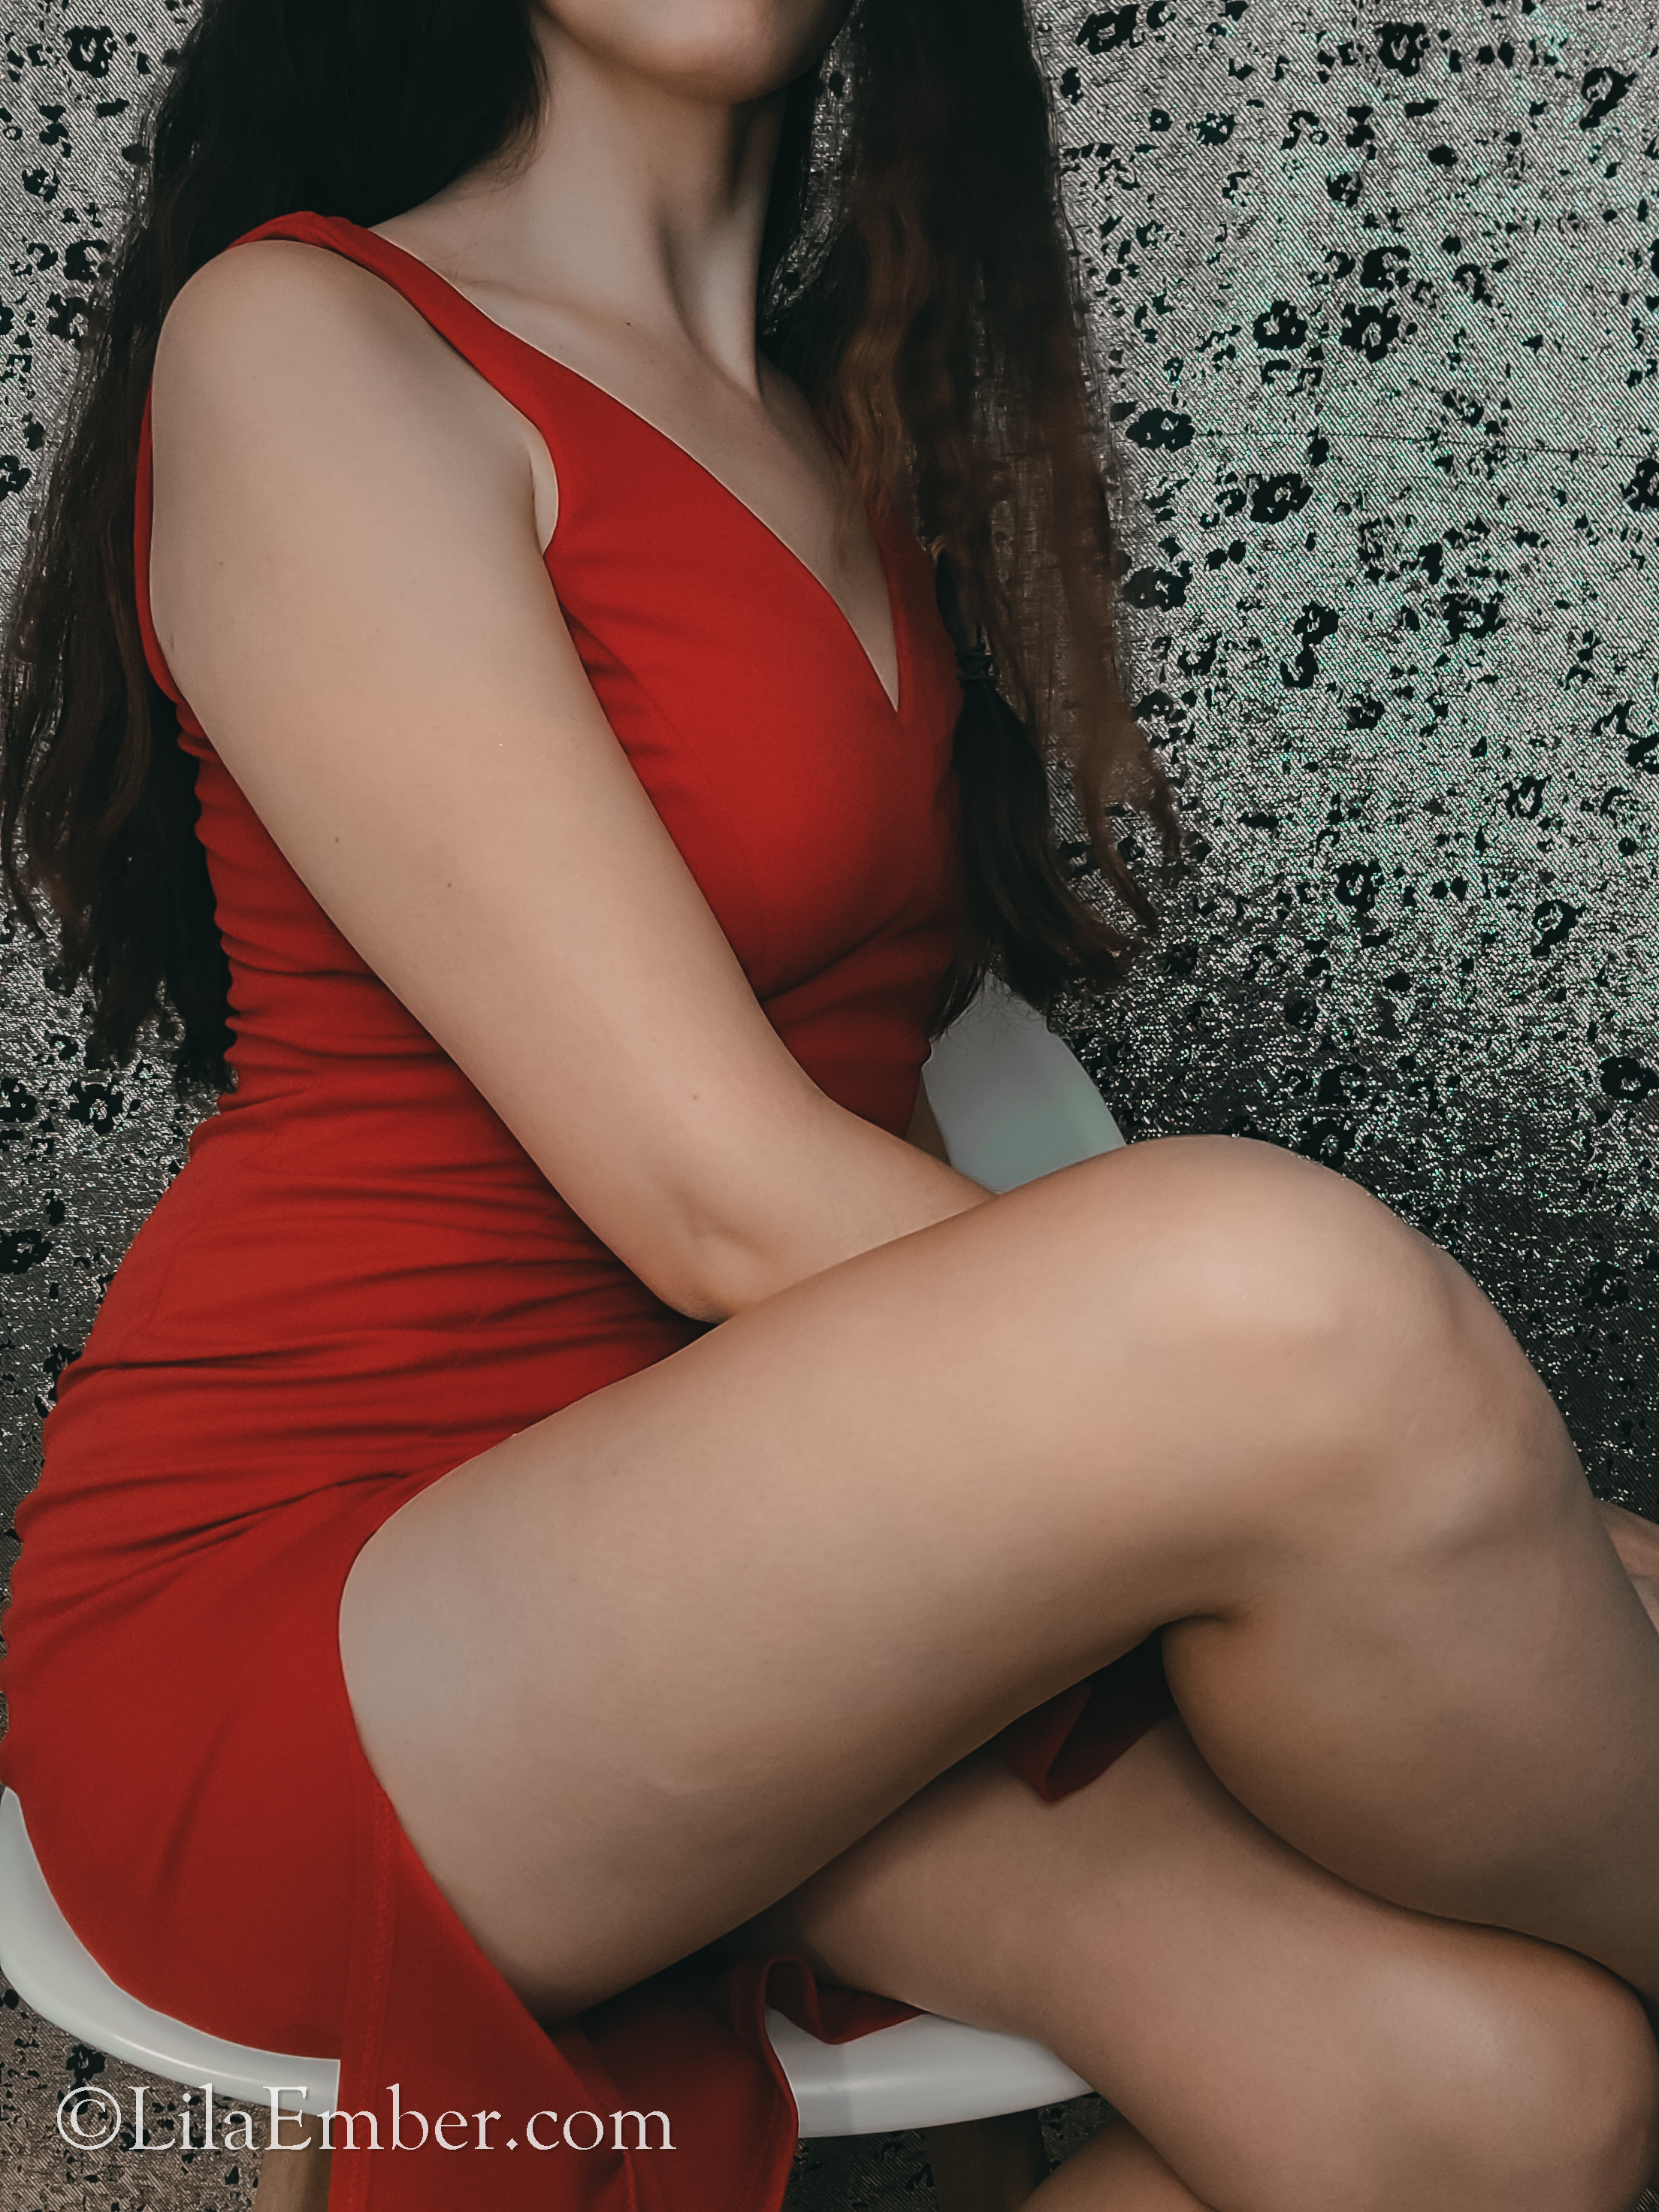 Woman sitting sophisticatedly in a sexy red dress.